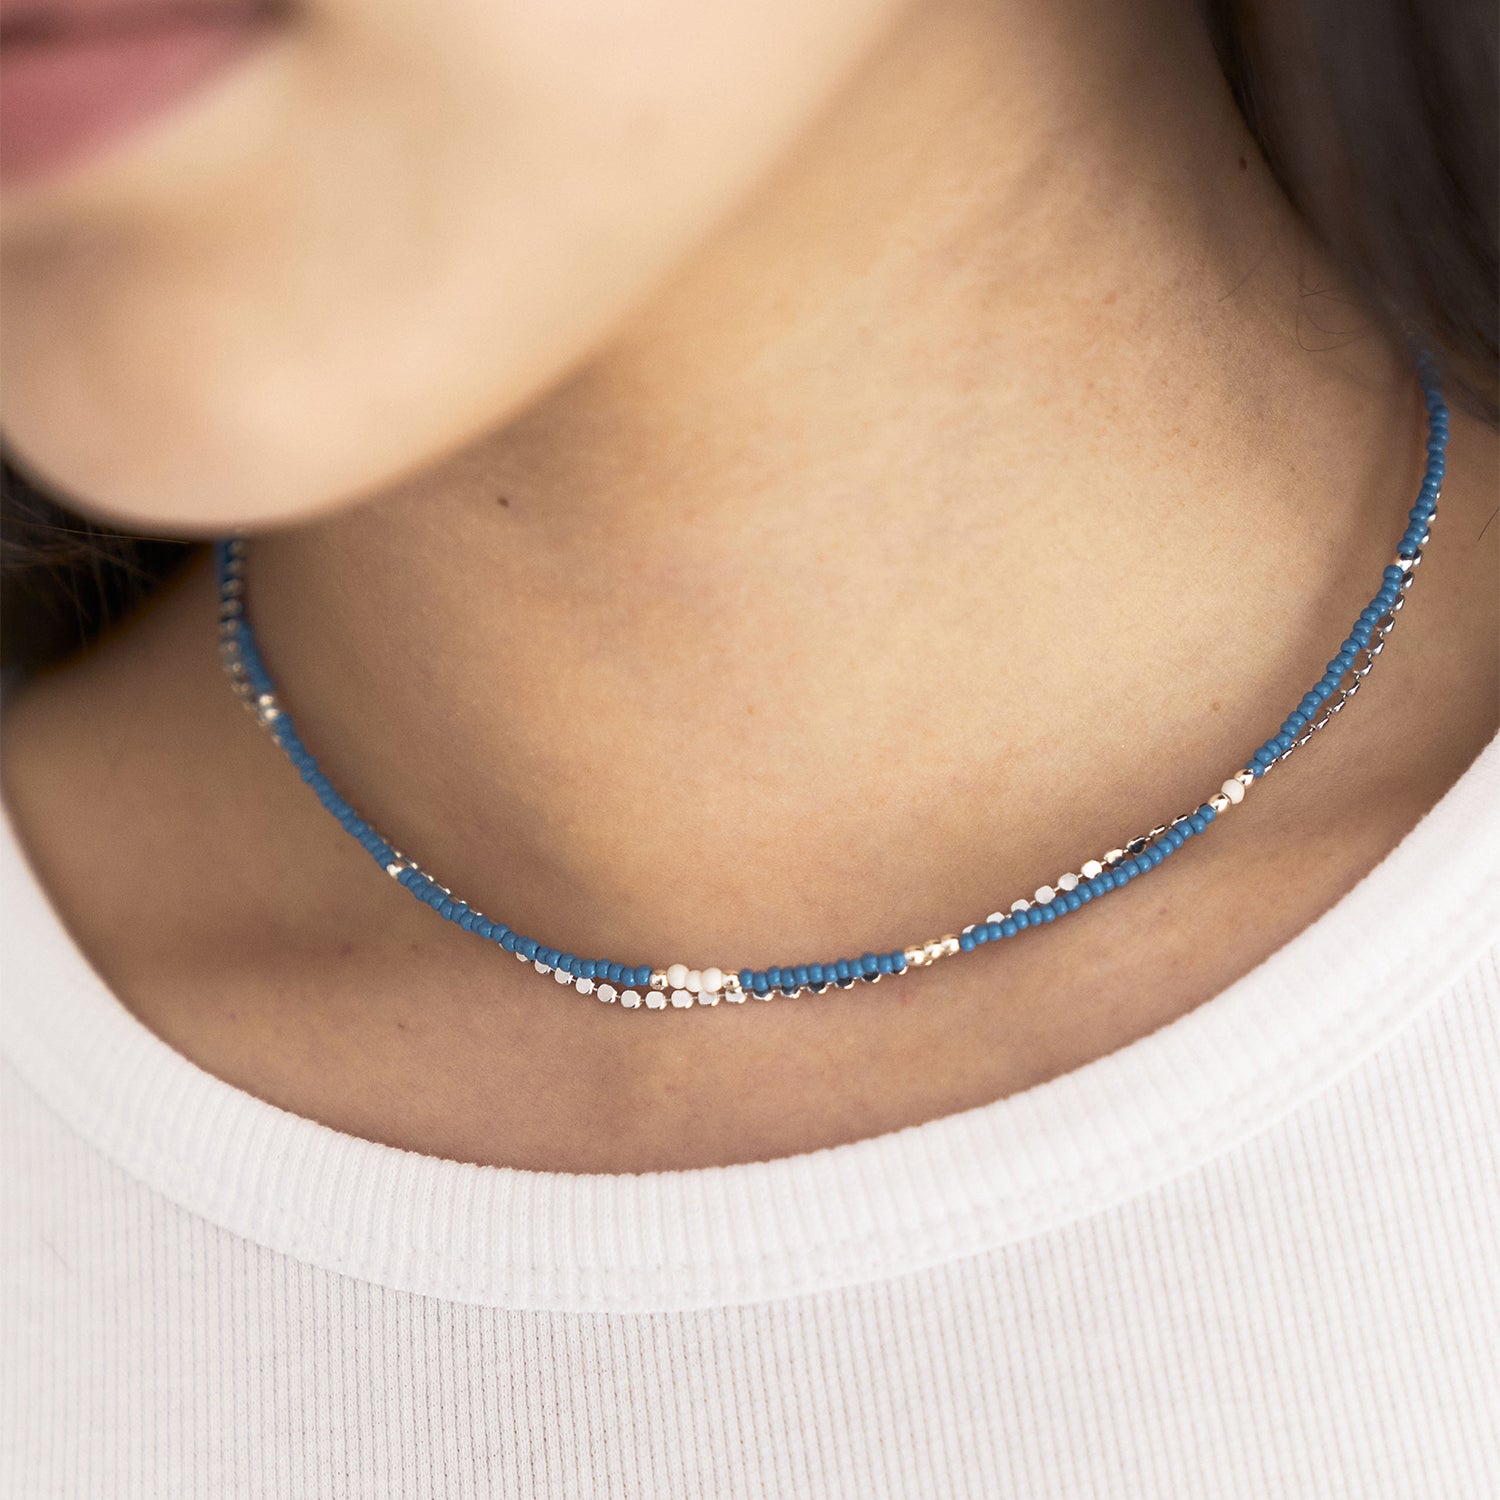 LOVE SKINNY BEADS NECKLACE BLUE